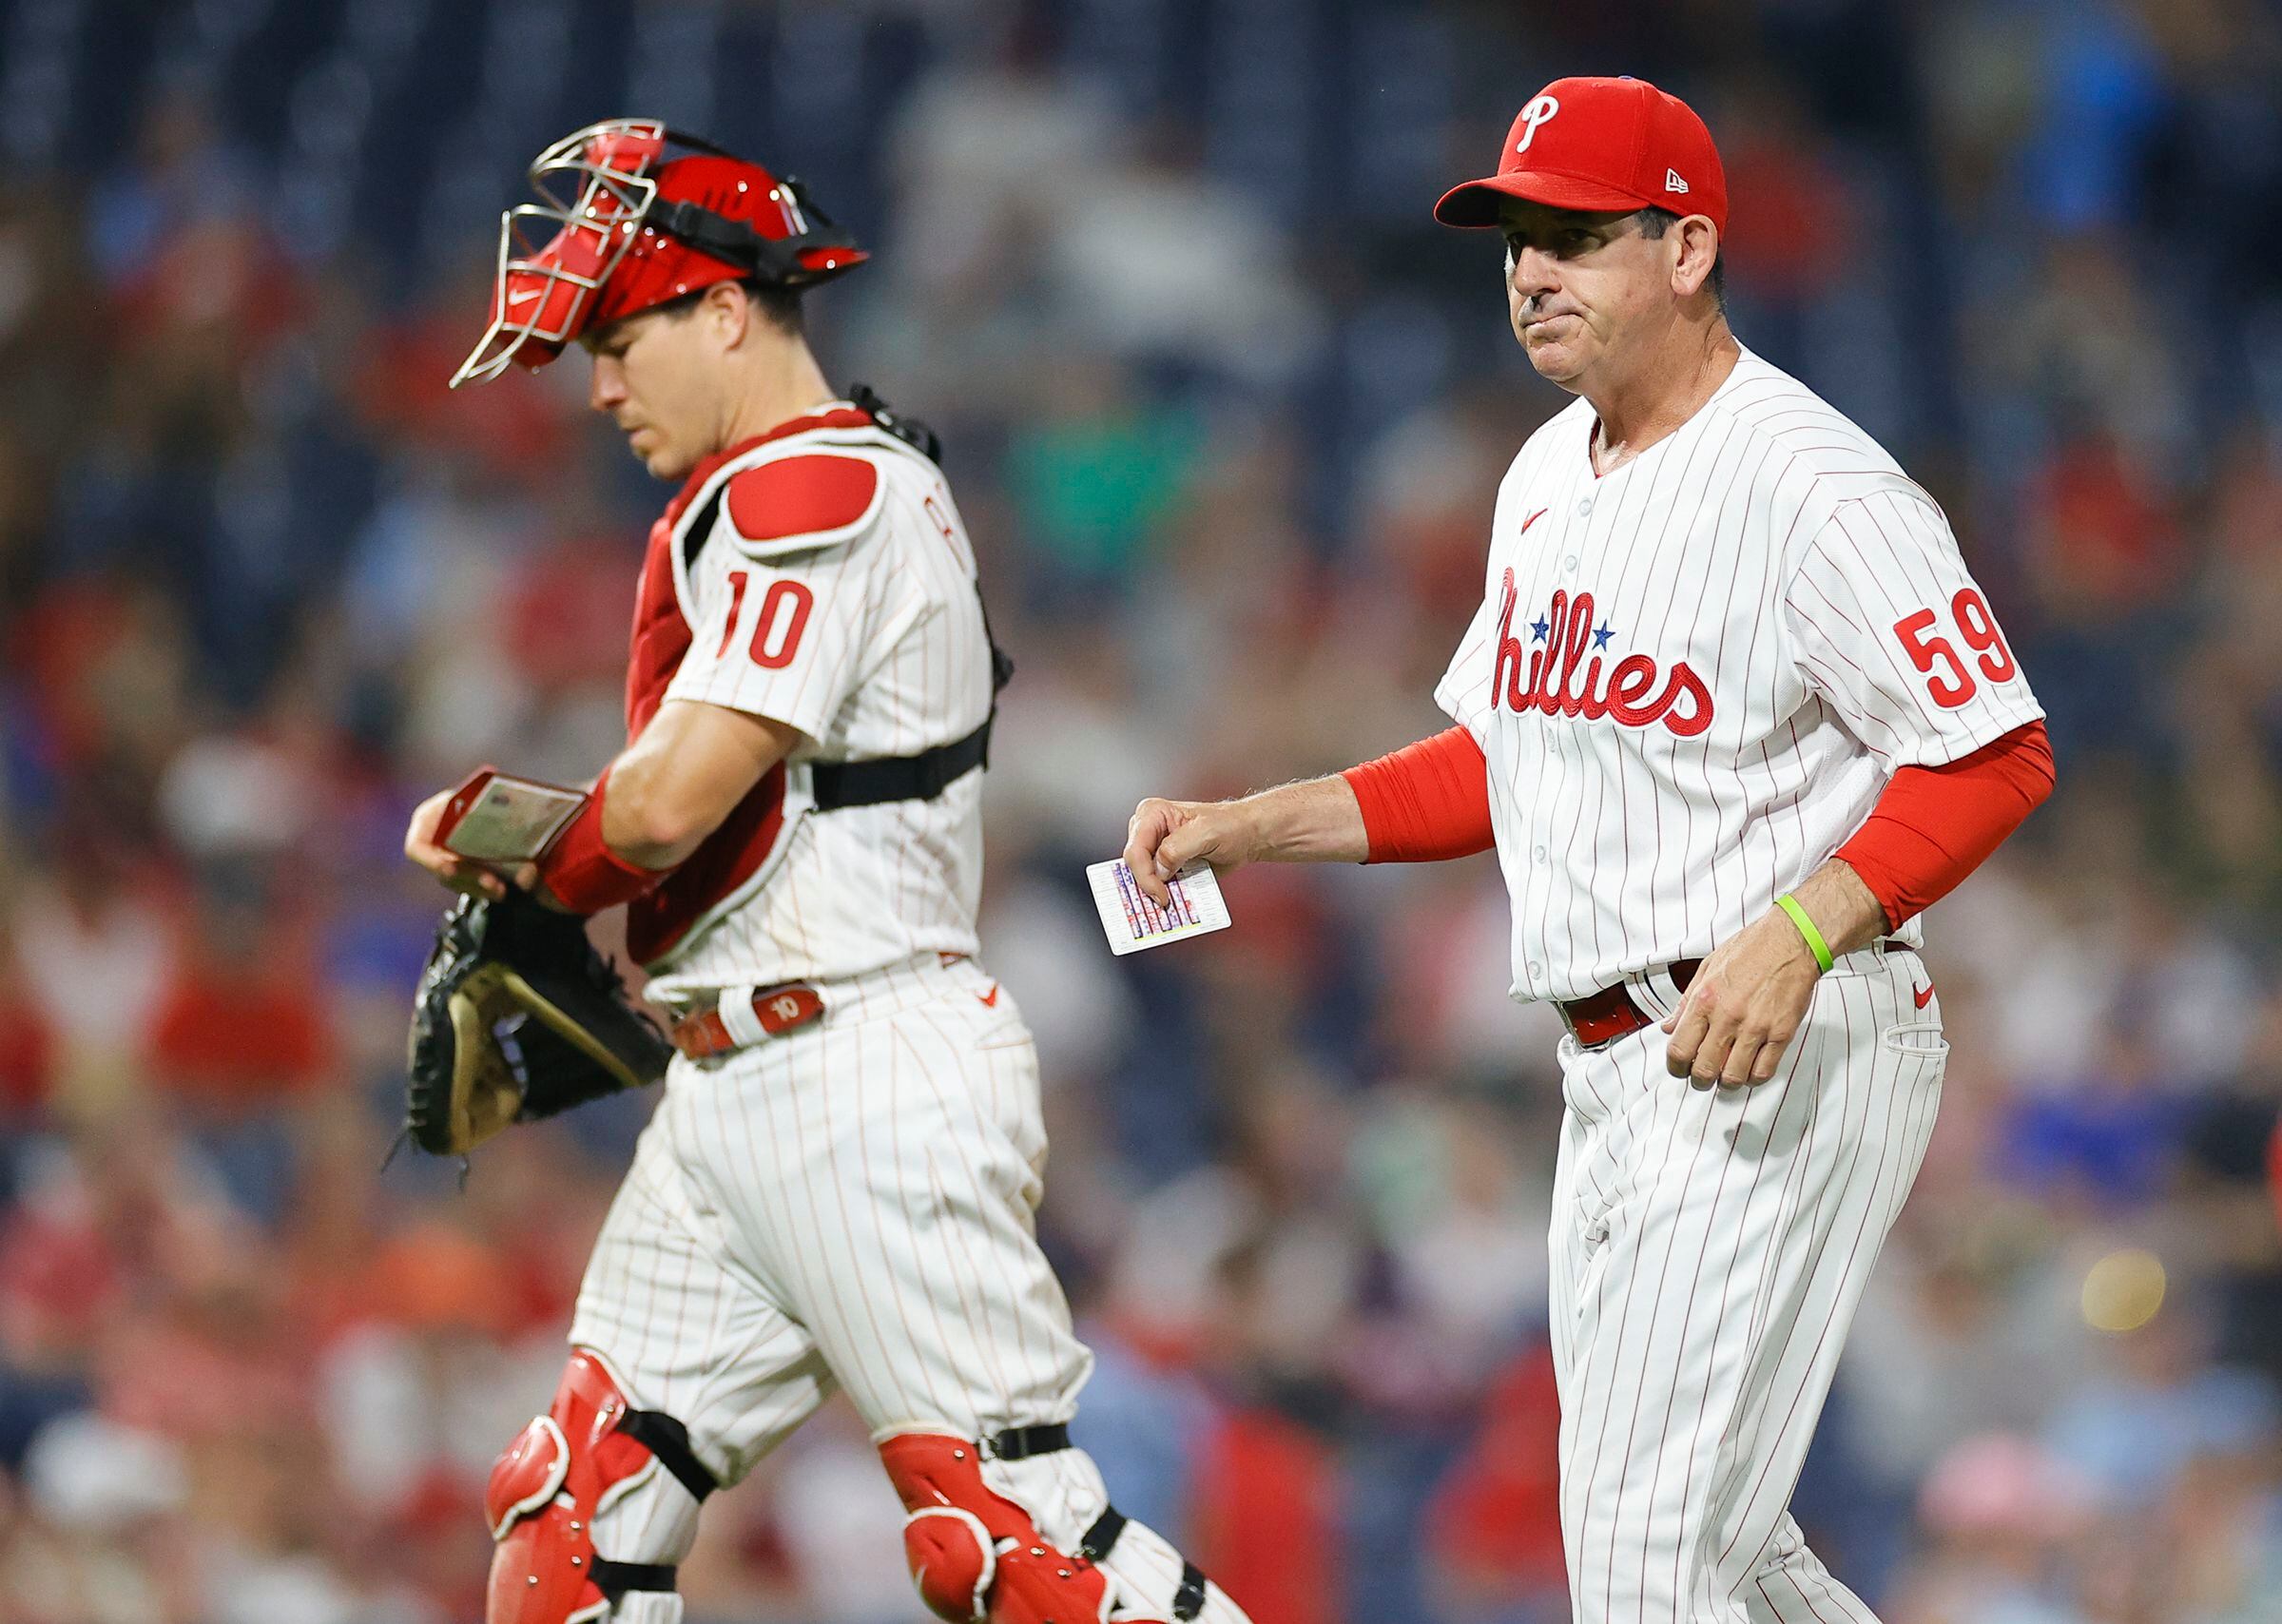 Sports betting: Rob Thomson's 9-0 start with the Phillies was also a  lucrative play for some bettors